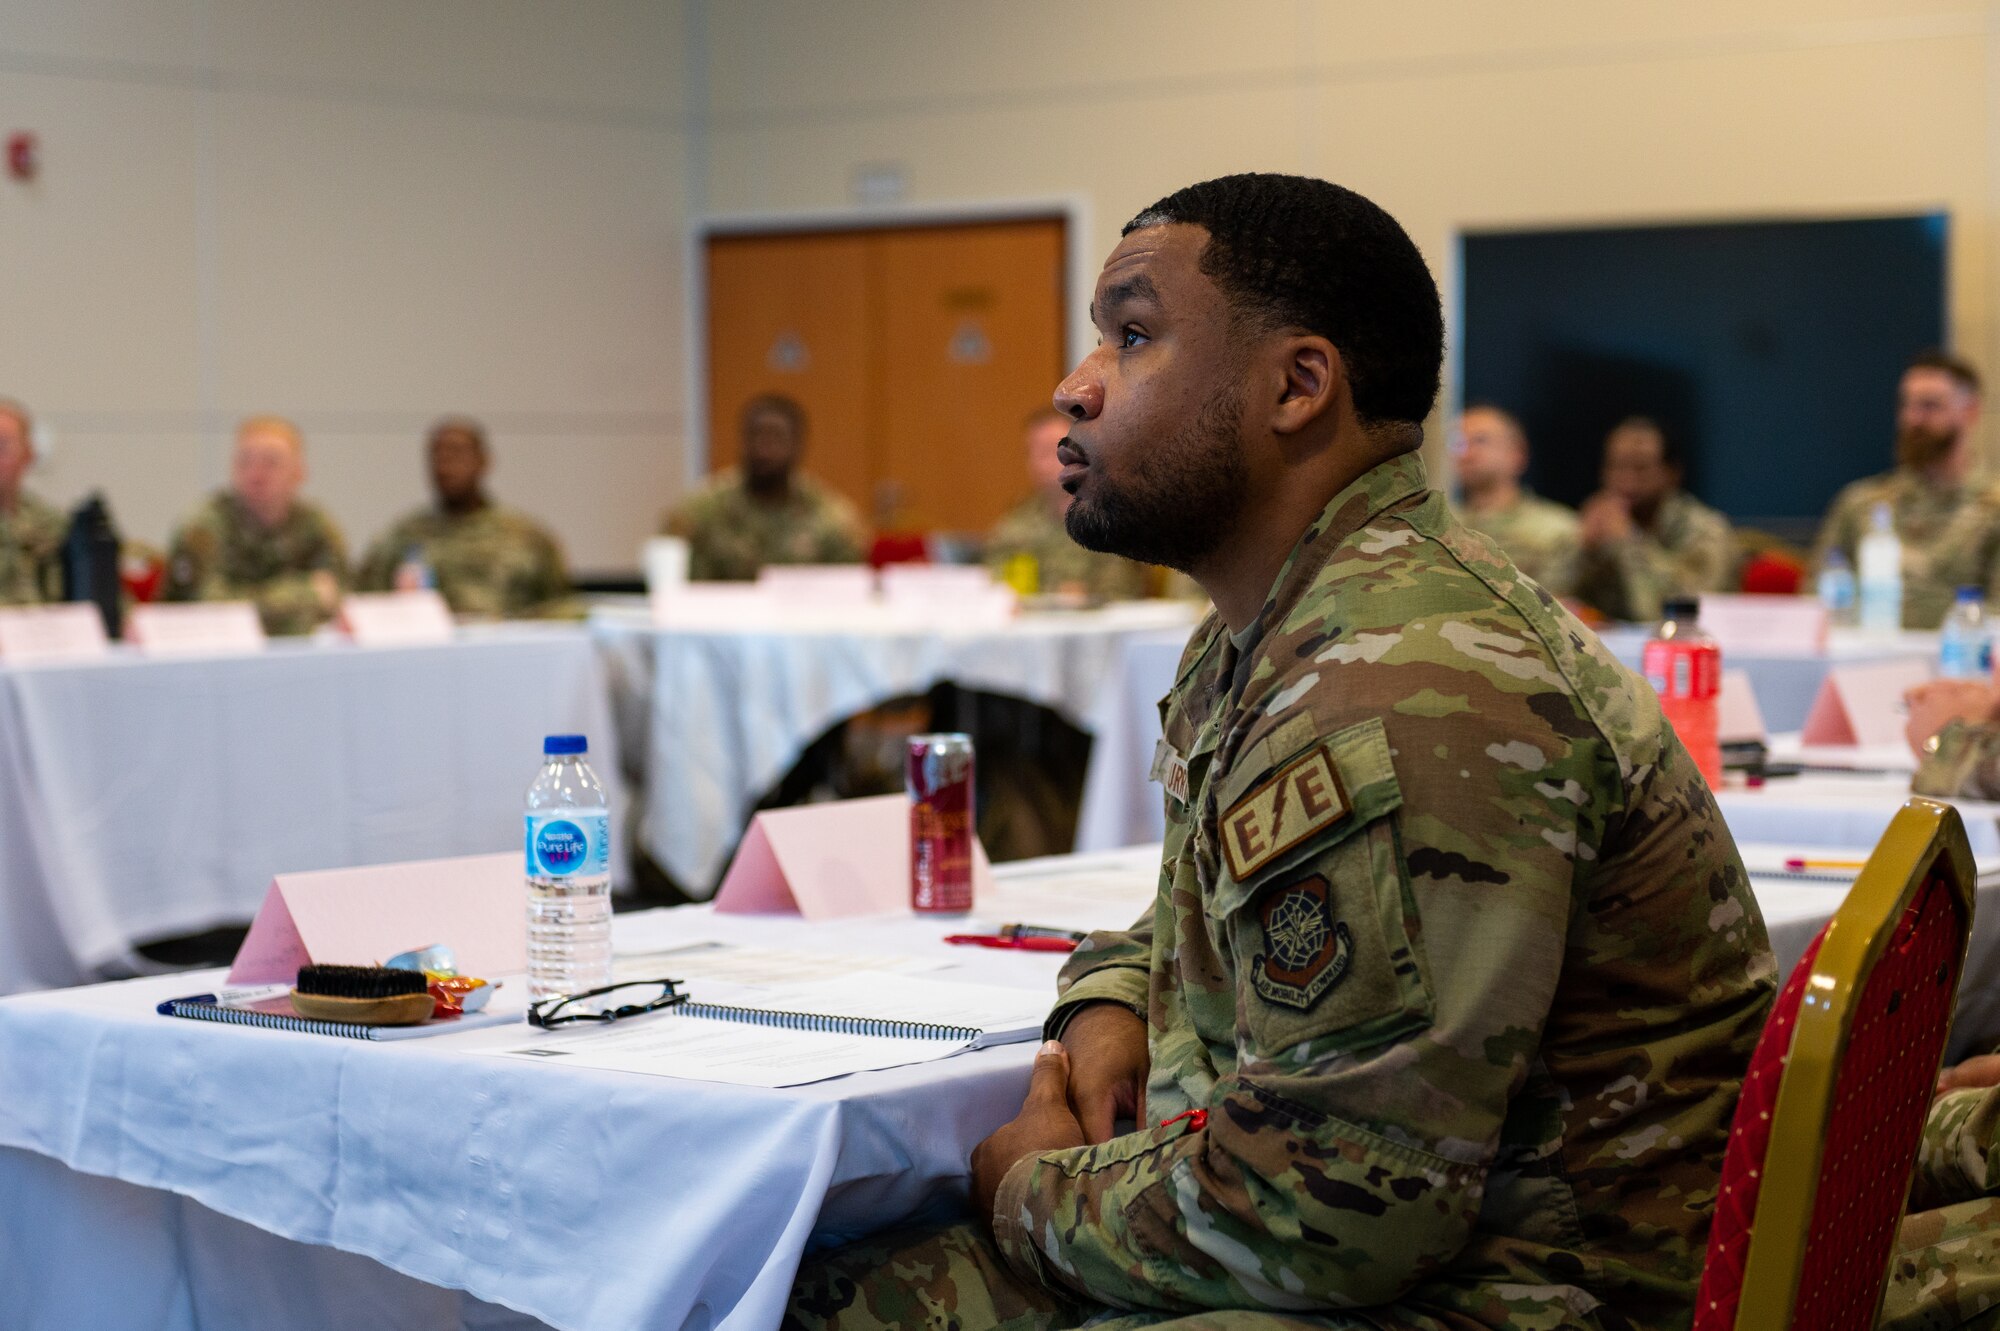 An Airmen listens intently to a speaker out of frame